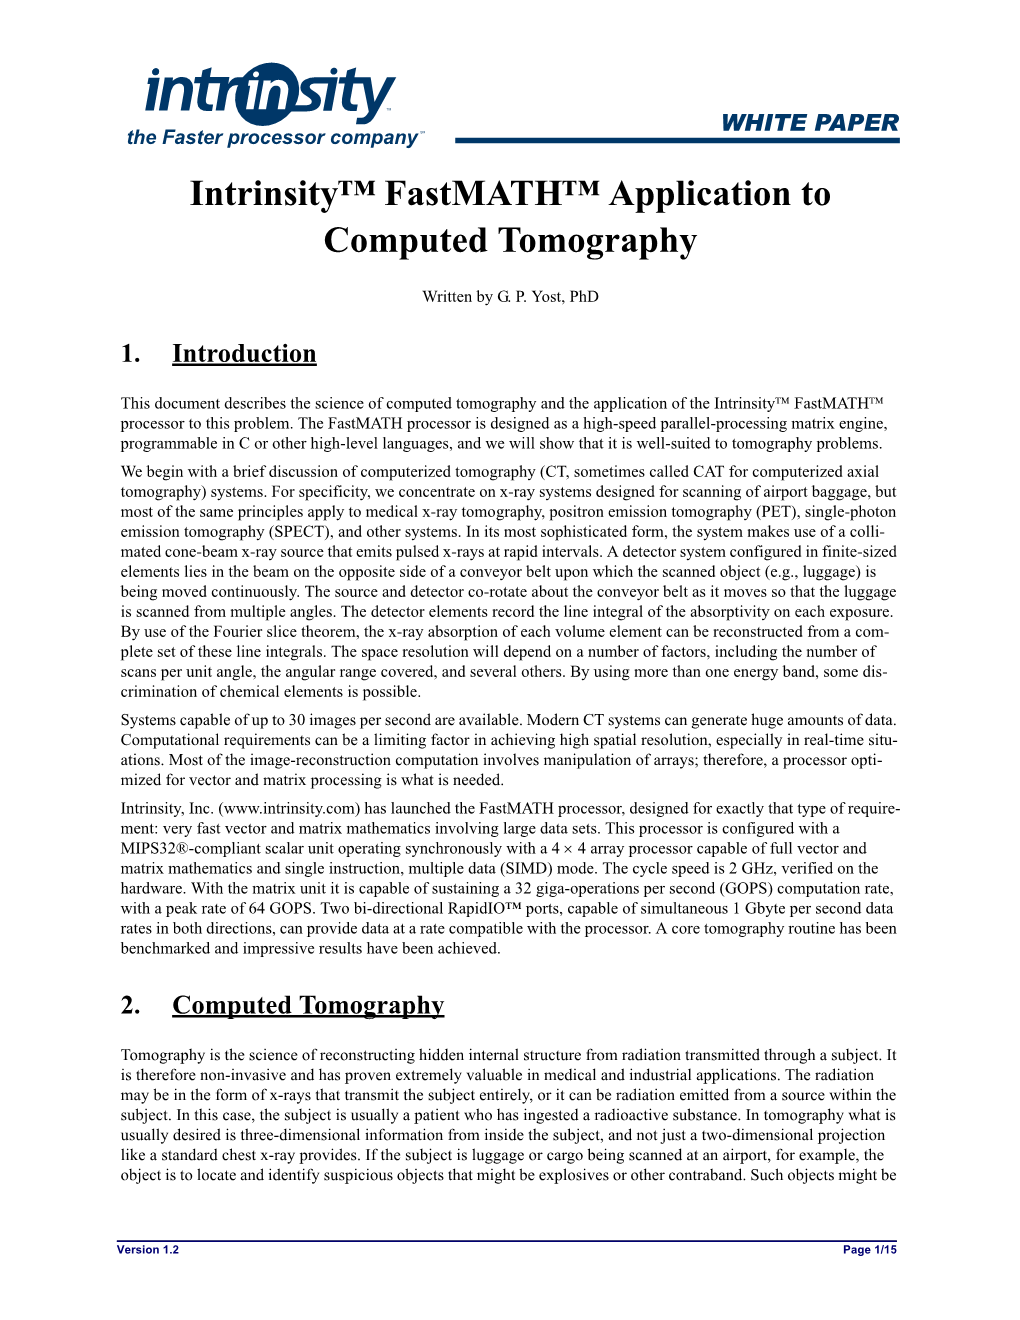 Intrinsity(Tm) Fastmath(Tm) Application to Computed Tomography